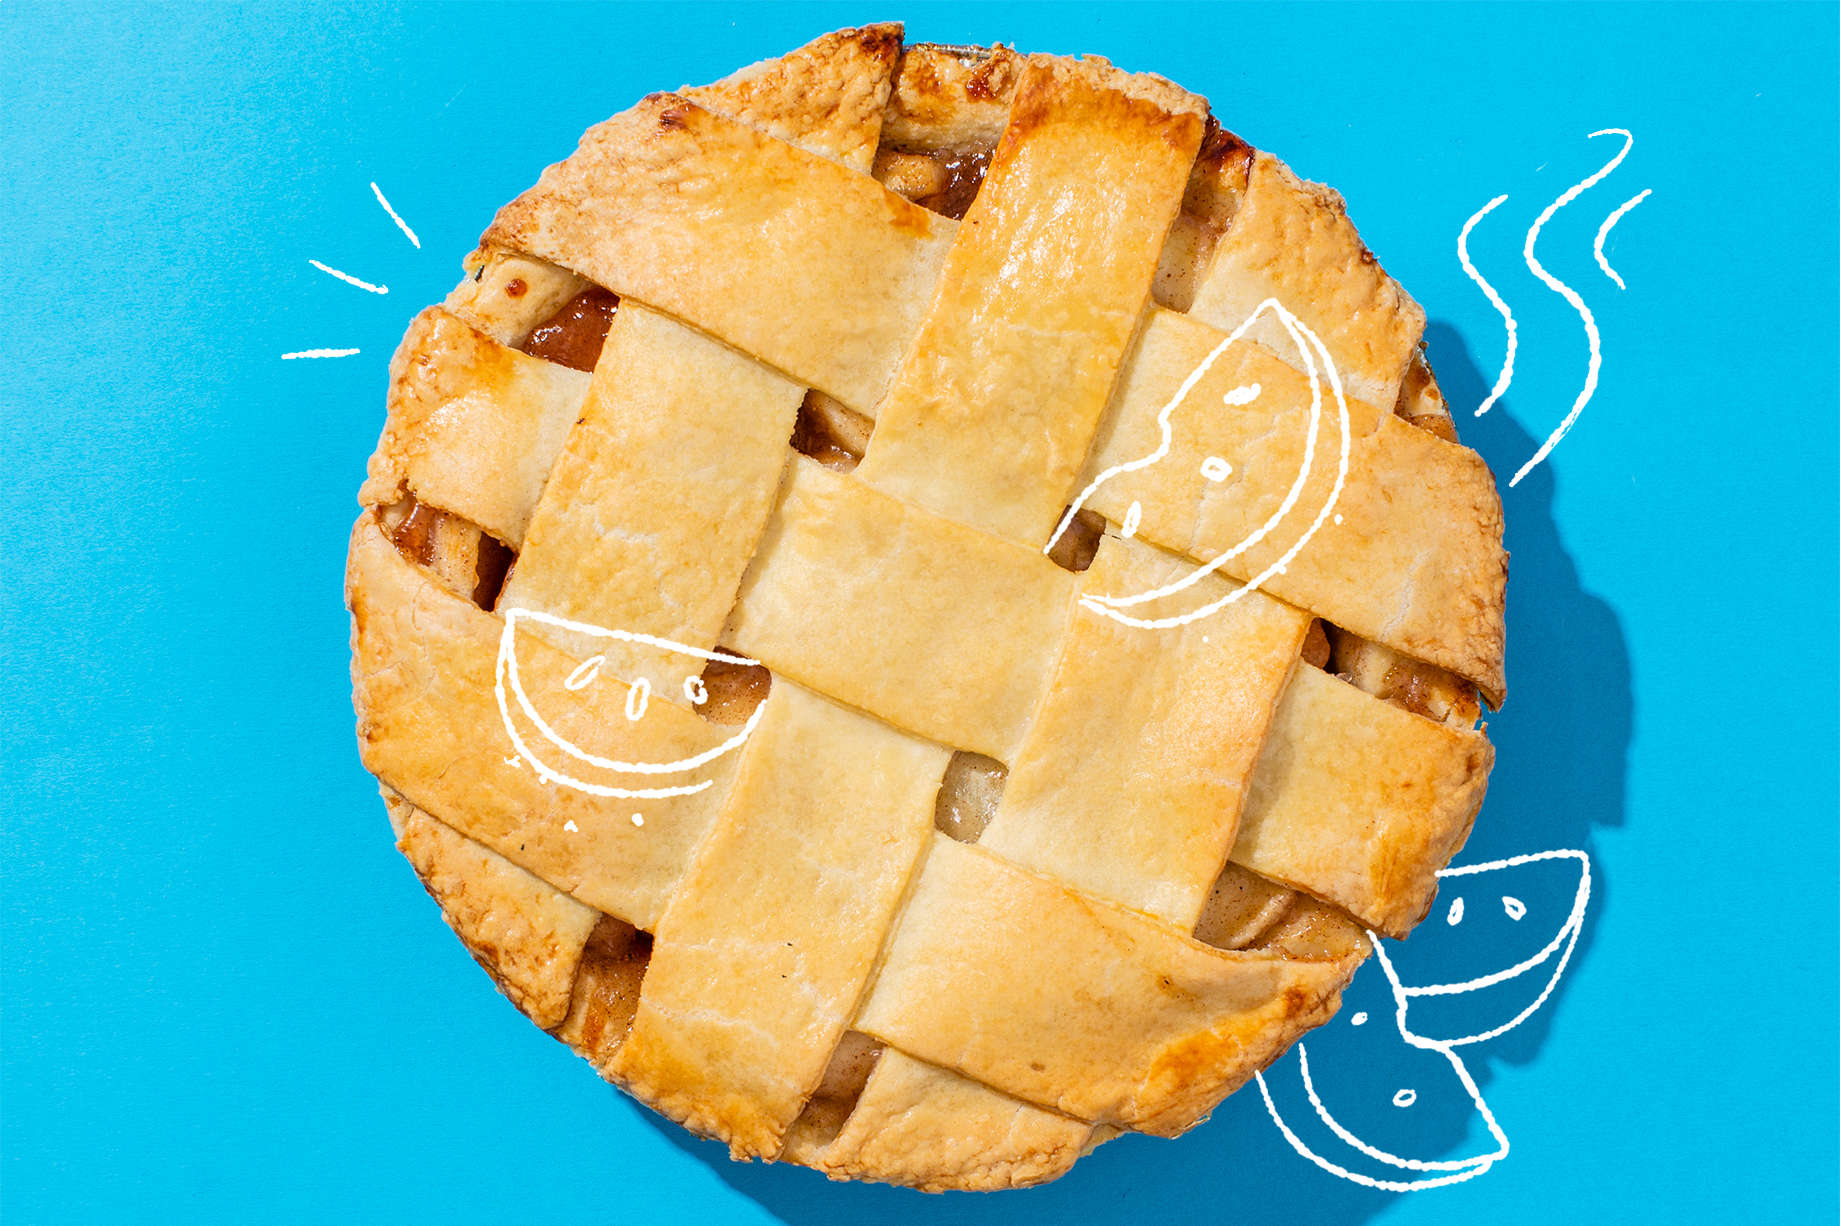 Best Pie Shops in America: Where to